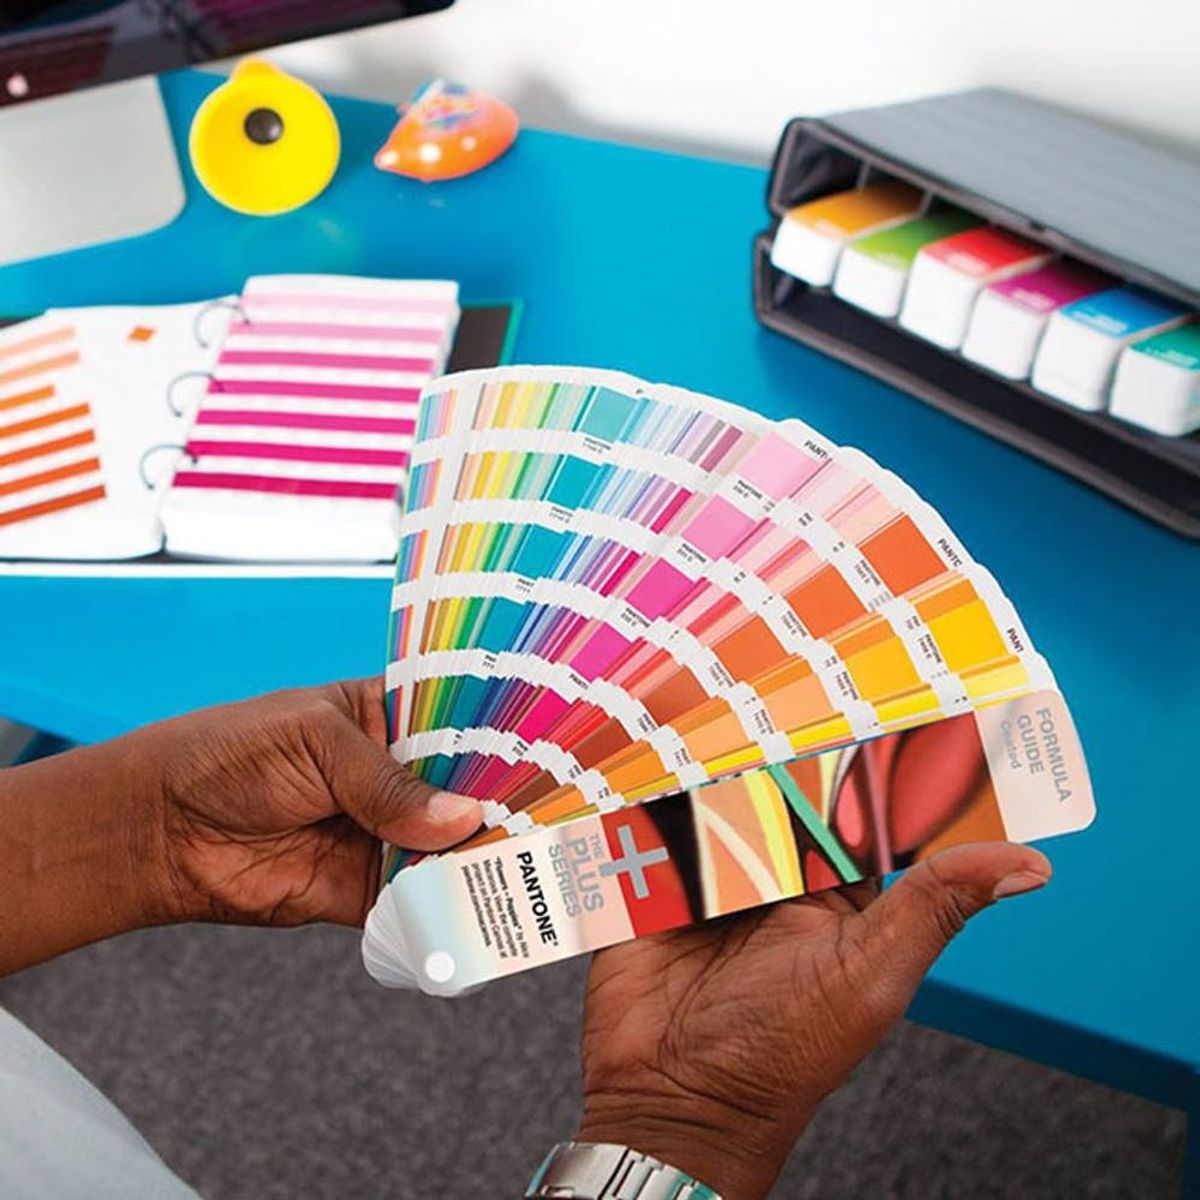 Pantone Just Released Its First New Color in 3 Years